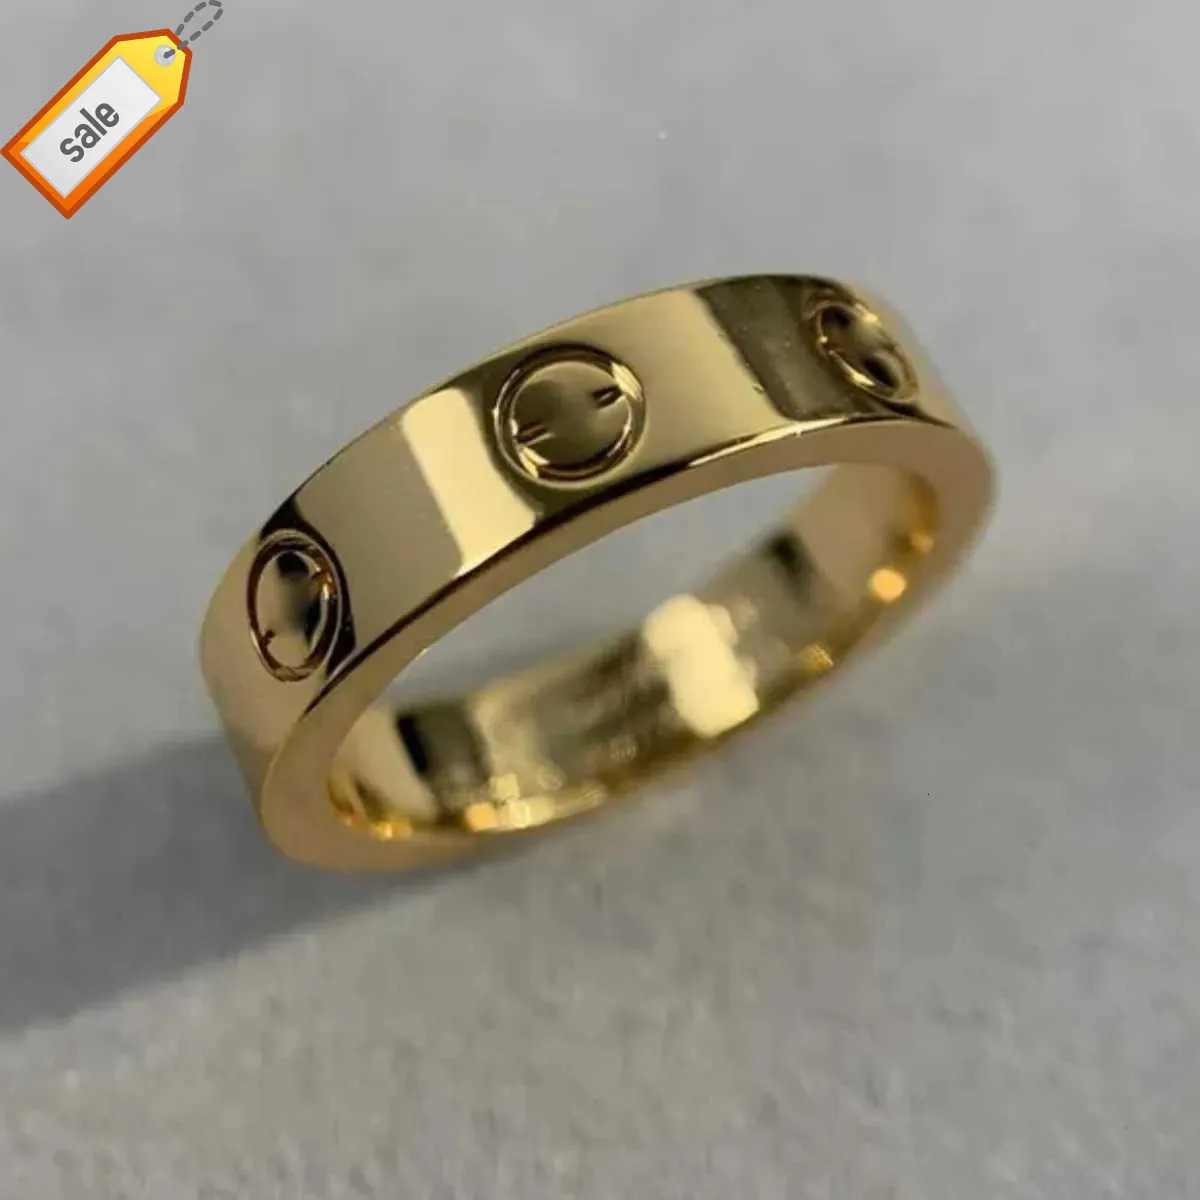 Original Engrave4 5 6mm Diamond Love Ring Gold Sier Rose 316L Anelli in acciaio inossidabile Woman Man Fedding Jewelry Lady Party 6 7 8 9 10 11 B9